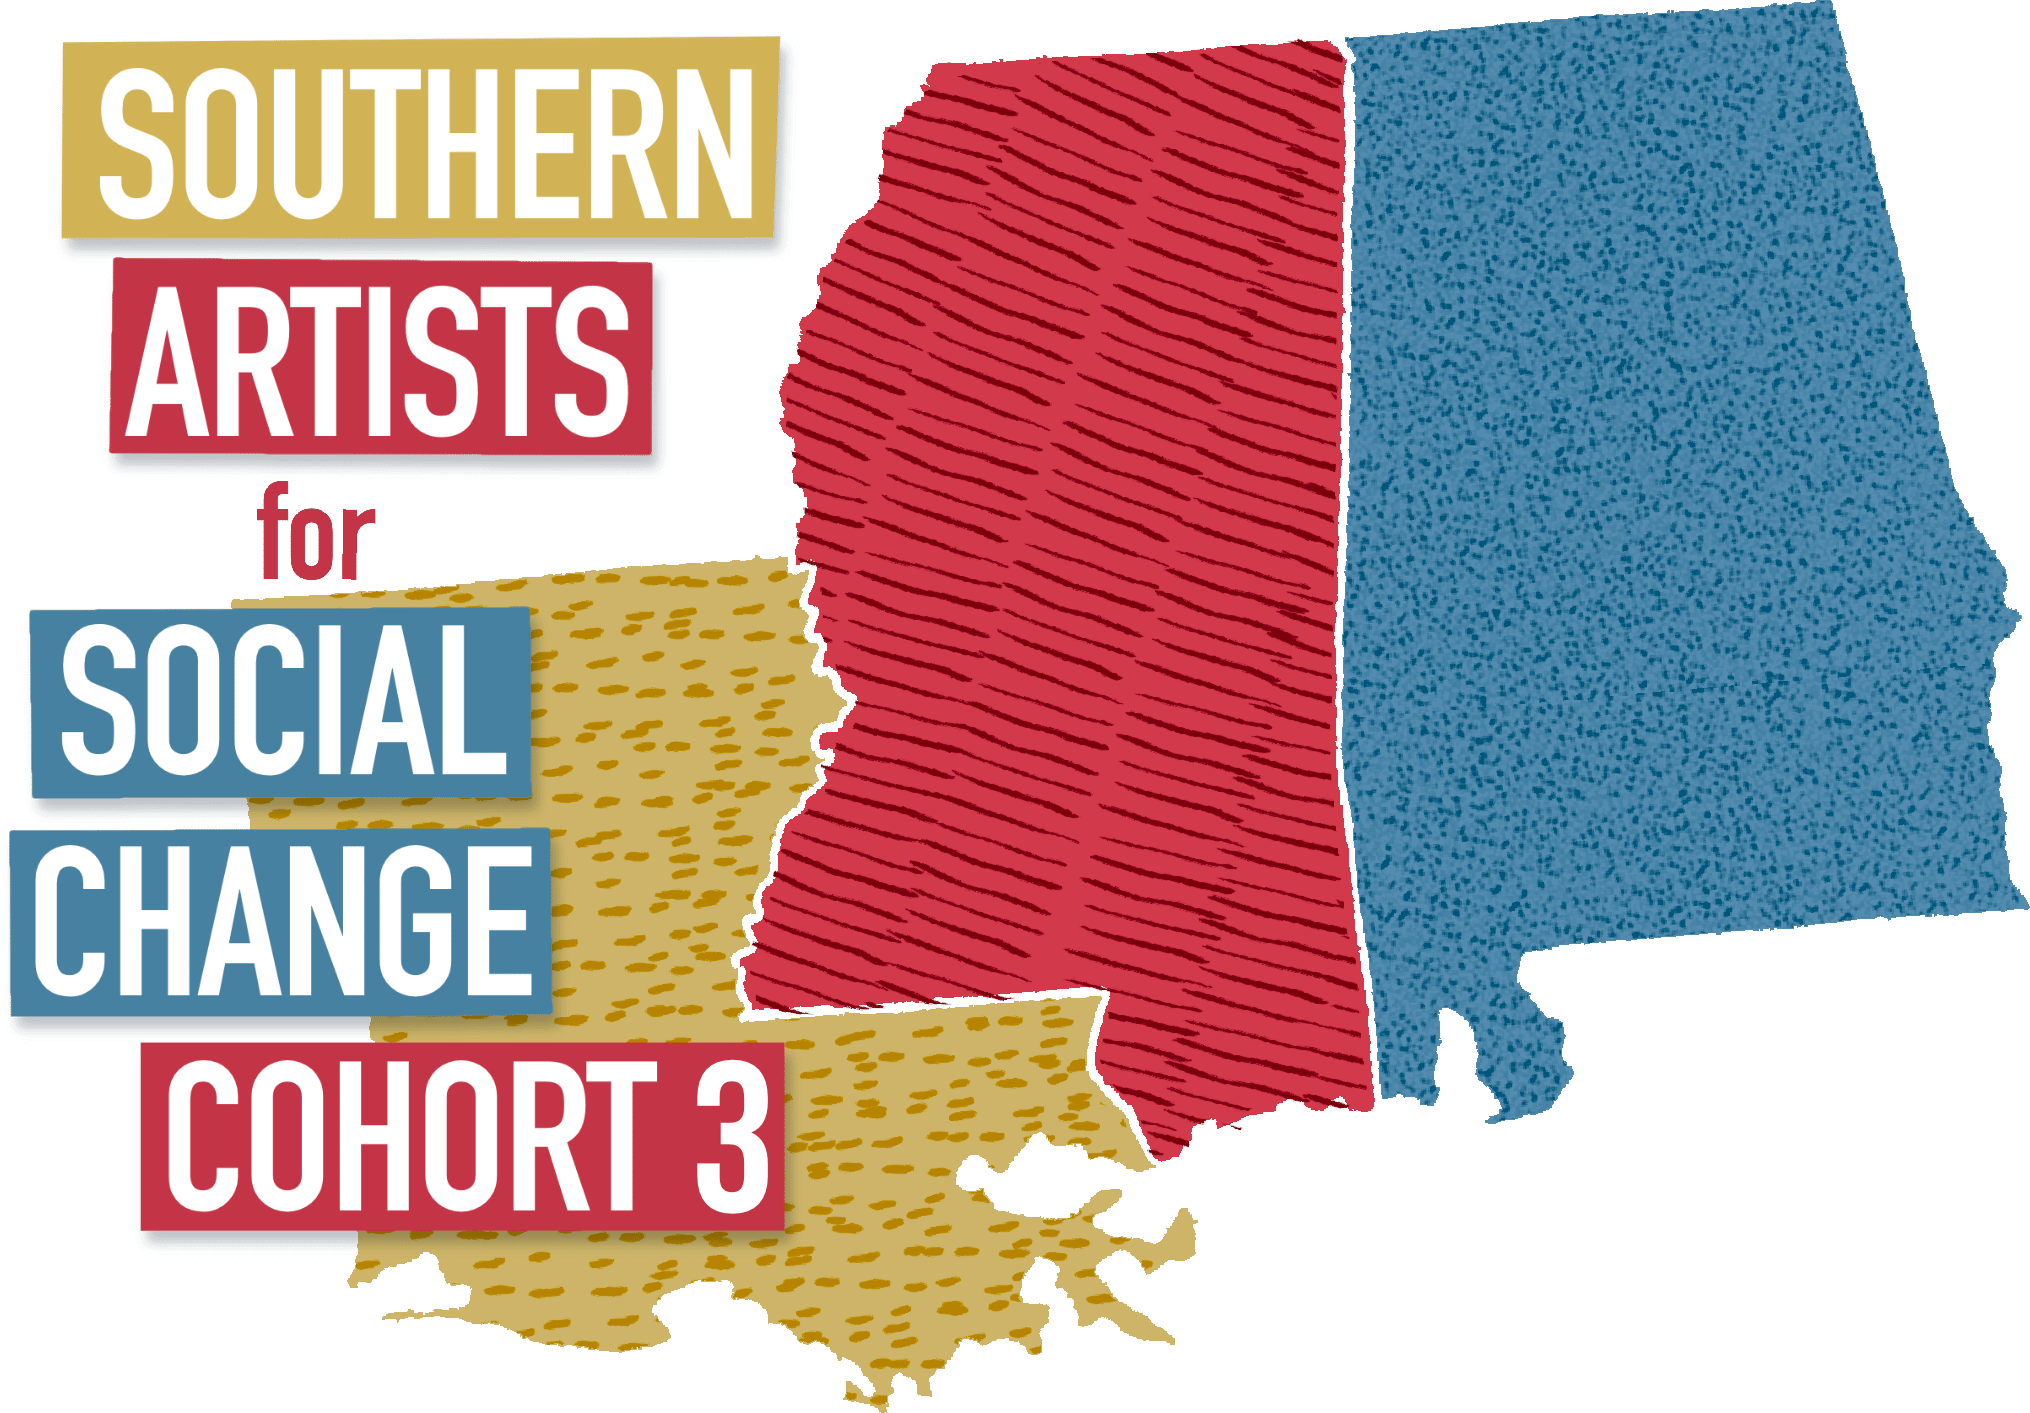 State outlines of Louisiana, Mississippi, and Alabama in yellow, red and blue with different textured lines on each. The text 'Southern Artists for Social Change Cohort 3' appears over the left side of Louisiana